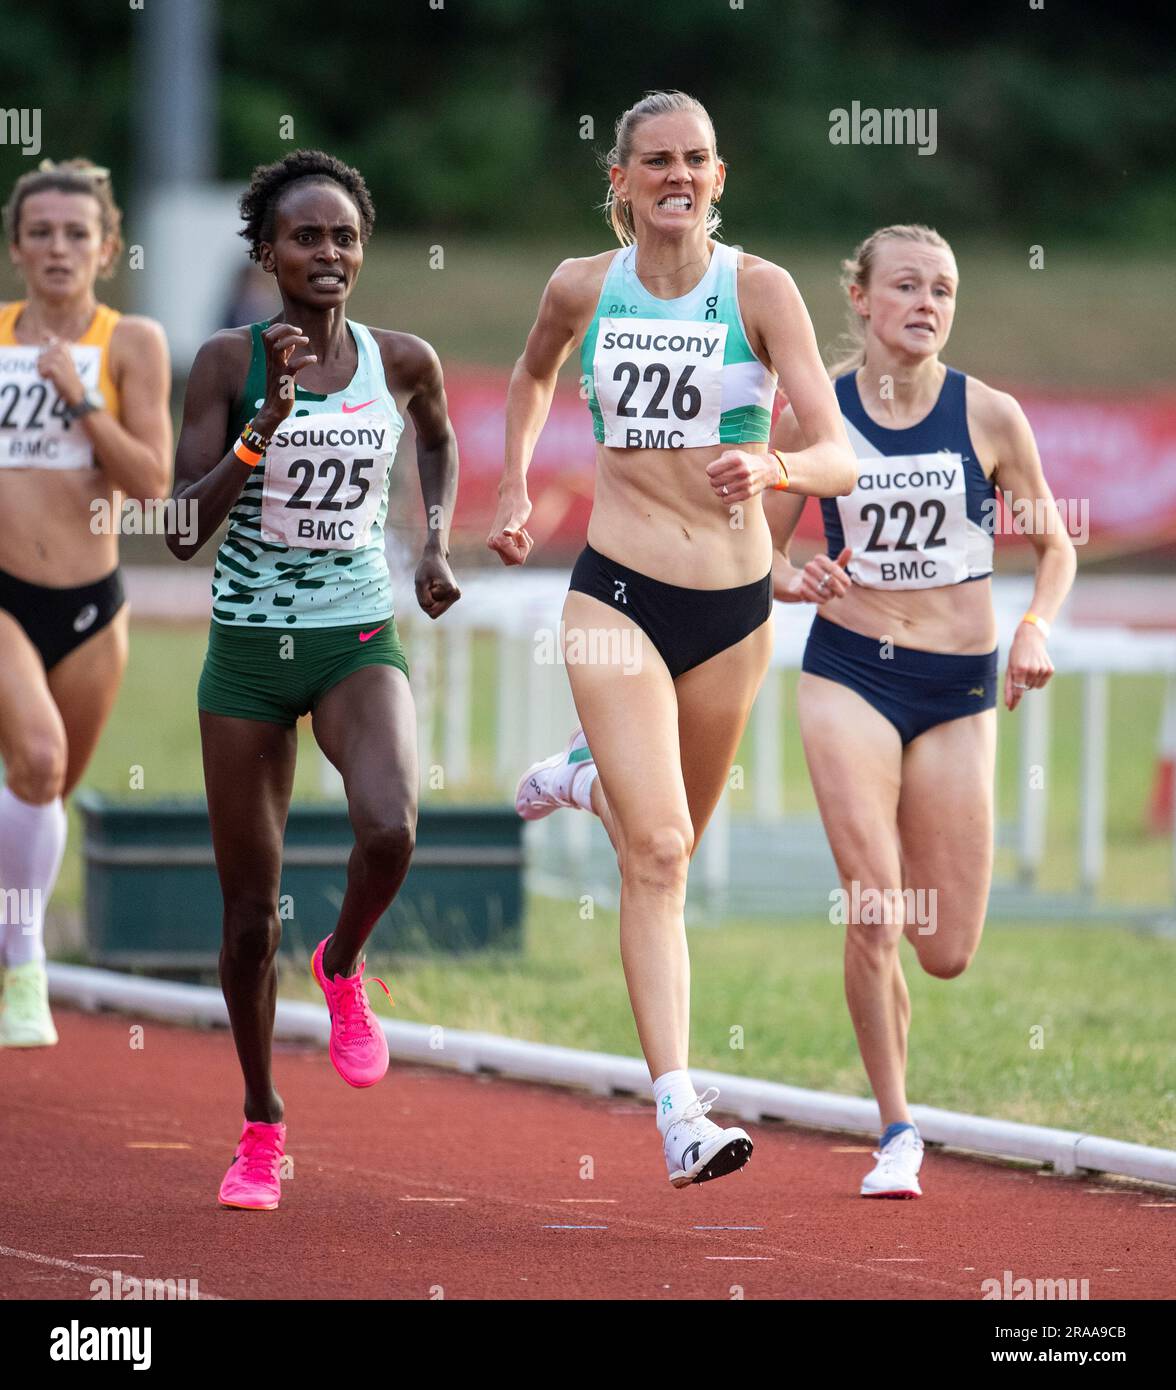 Mary Ekiru, Maudie Skyring and Niamh Bridson Hubbard competing in the BMC women’s 1500m A race at the British Milers Club Grand Prix, Woodside Stadium Stock Photo